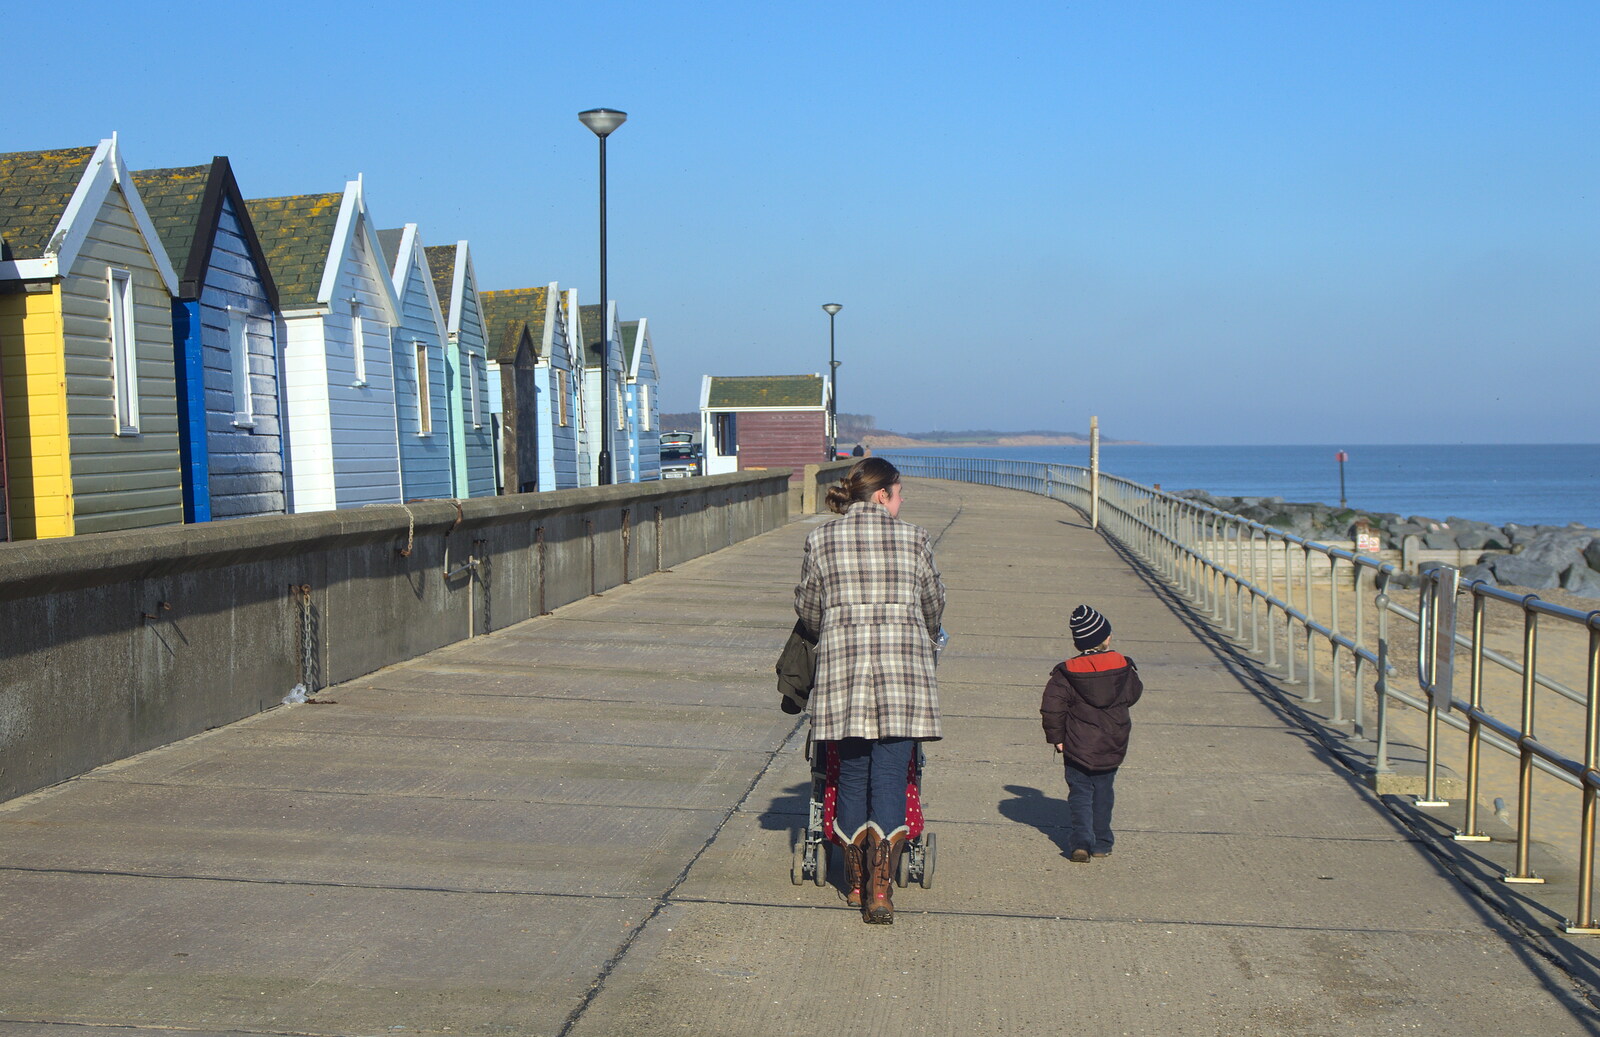 Isobel and Fred wander off from A Busy Day, Southwold and Thornham, Suffolk - 11th November 2012